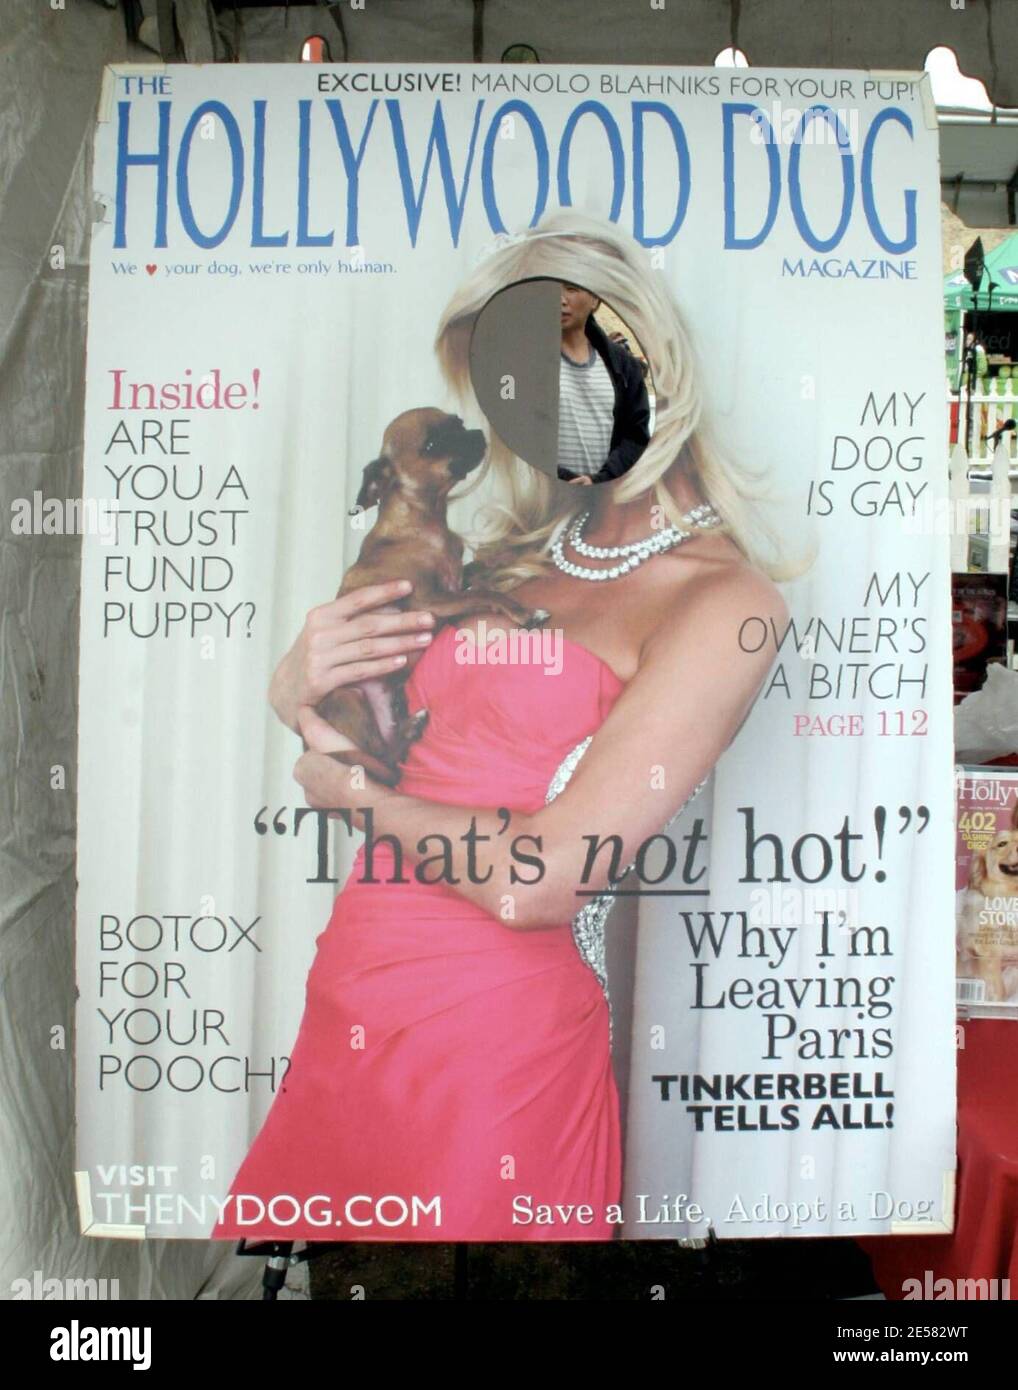 Paris HIlton gets a new magazine cover, this time though it's all about her dog. This blown up Hollywood Dog magazine cover was on display for people to pose with at the annual Nuts For Mutts event in Woodland Hills, Ca. where Kim Basinger was a no show. 4/22/07   [[ral]] Stock Photo